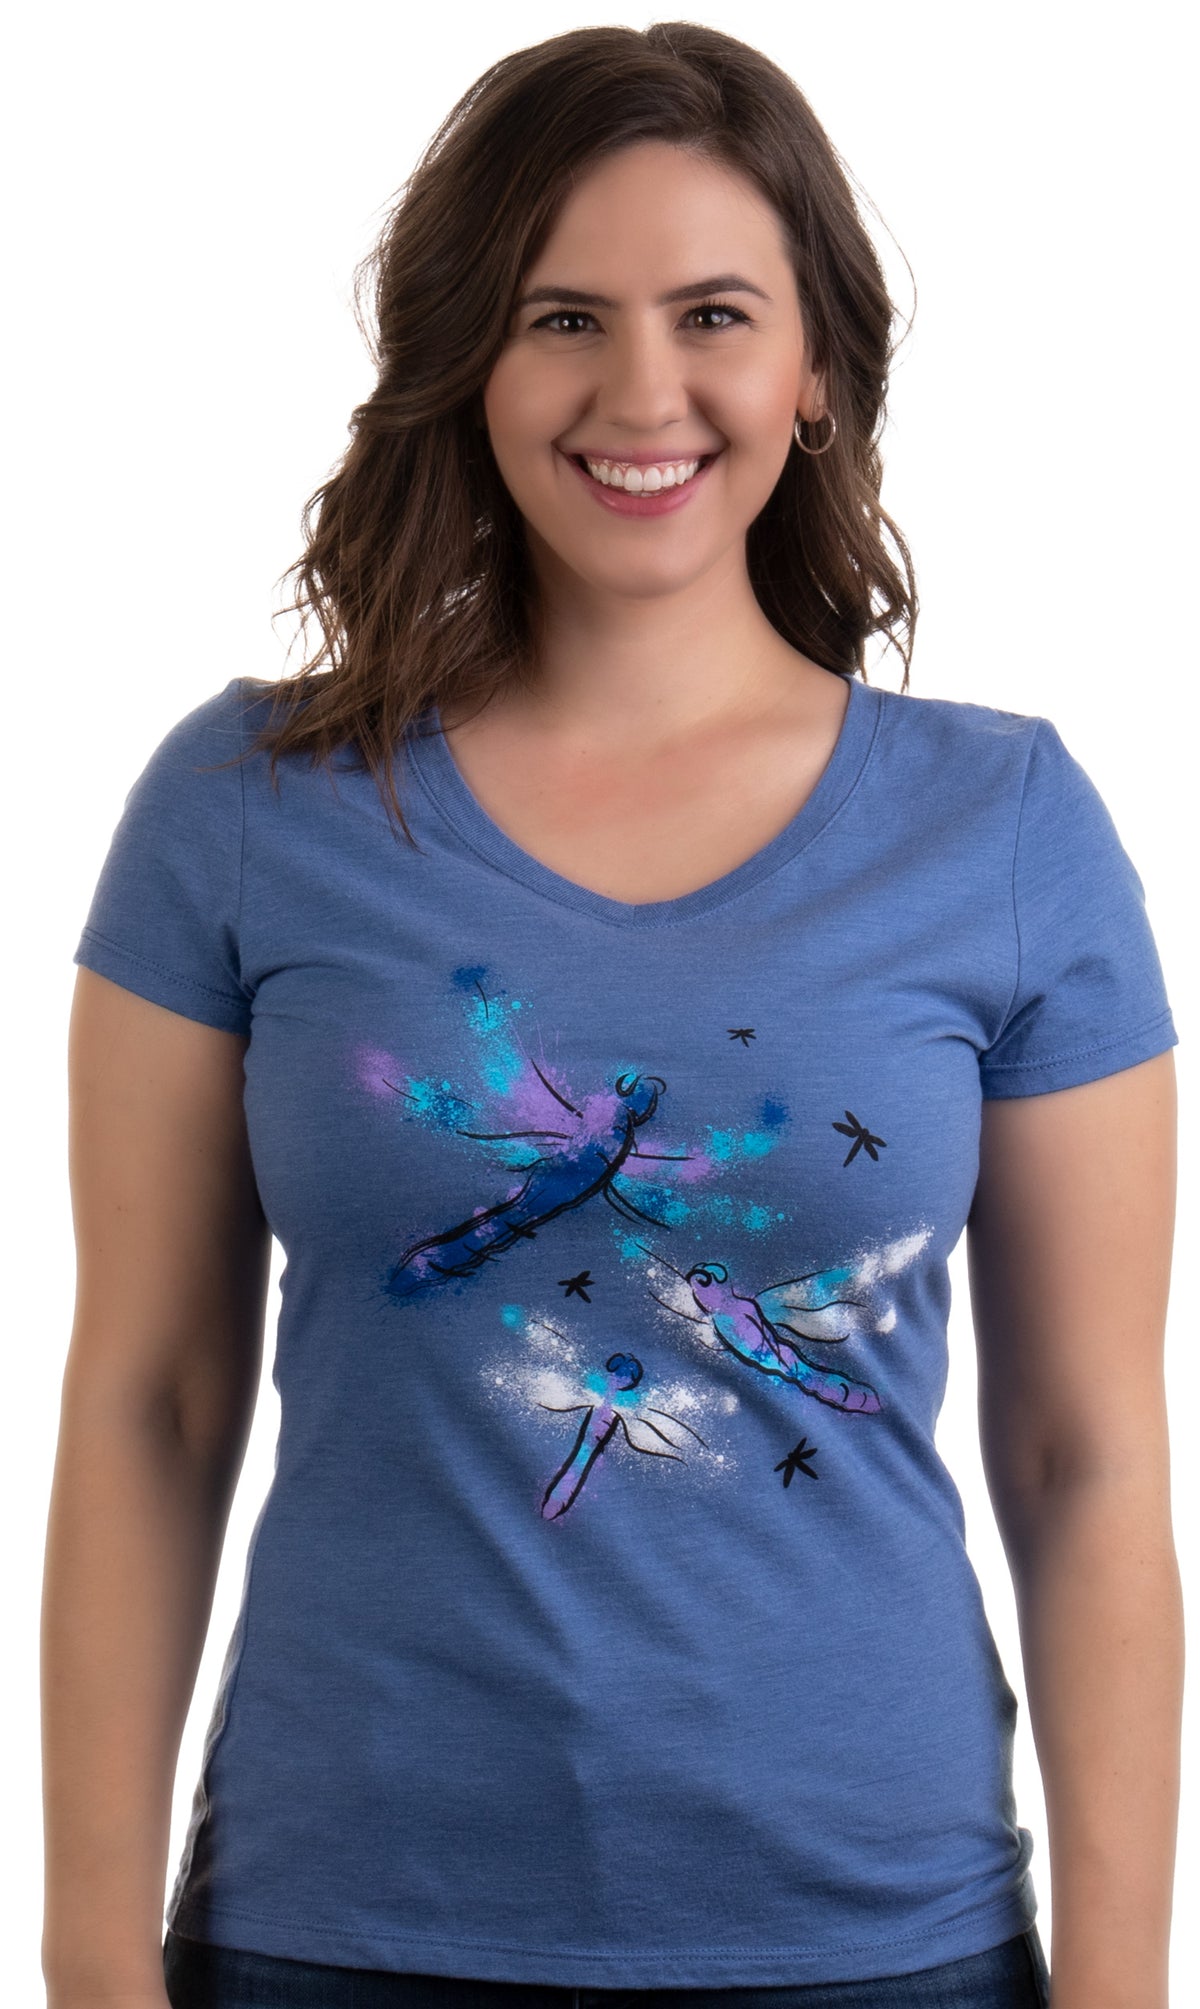 Dragonflies | Dragonfly Nature Art Insect Bug Cute Gift V-neck T-shirt for Women